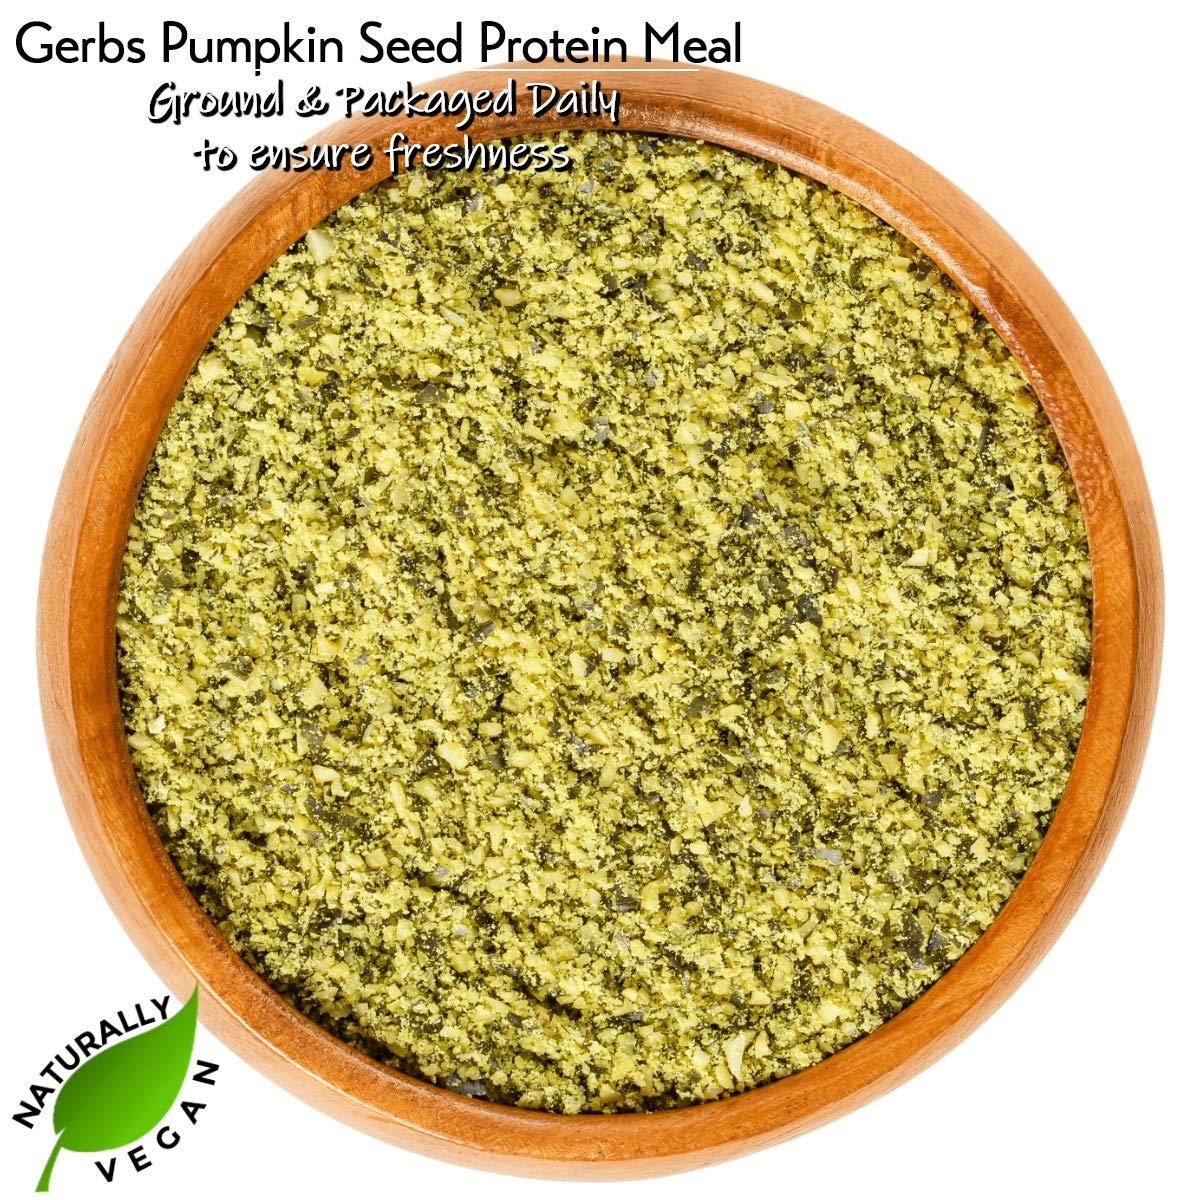 GERBS Pumpkin Seed Meal 4 LBS. Premium Grade | Freshly Harvested & Packaged in Resealable Bulk Bag | Non-GMO, Keto & Paleo | Heart healthy, Natural Sleep Aid & antioxidant rich | Gluten Peanut Free : Snack Nuts And Seeds : Grocery & Gourmet Food